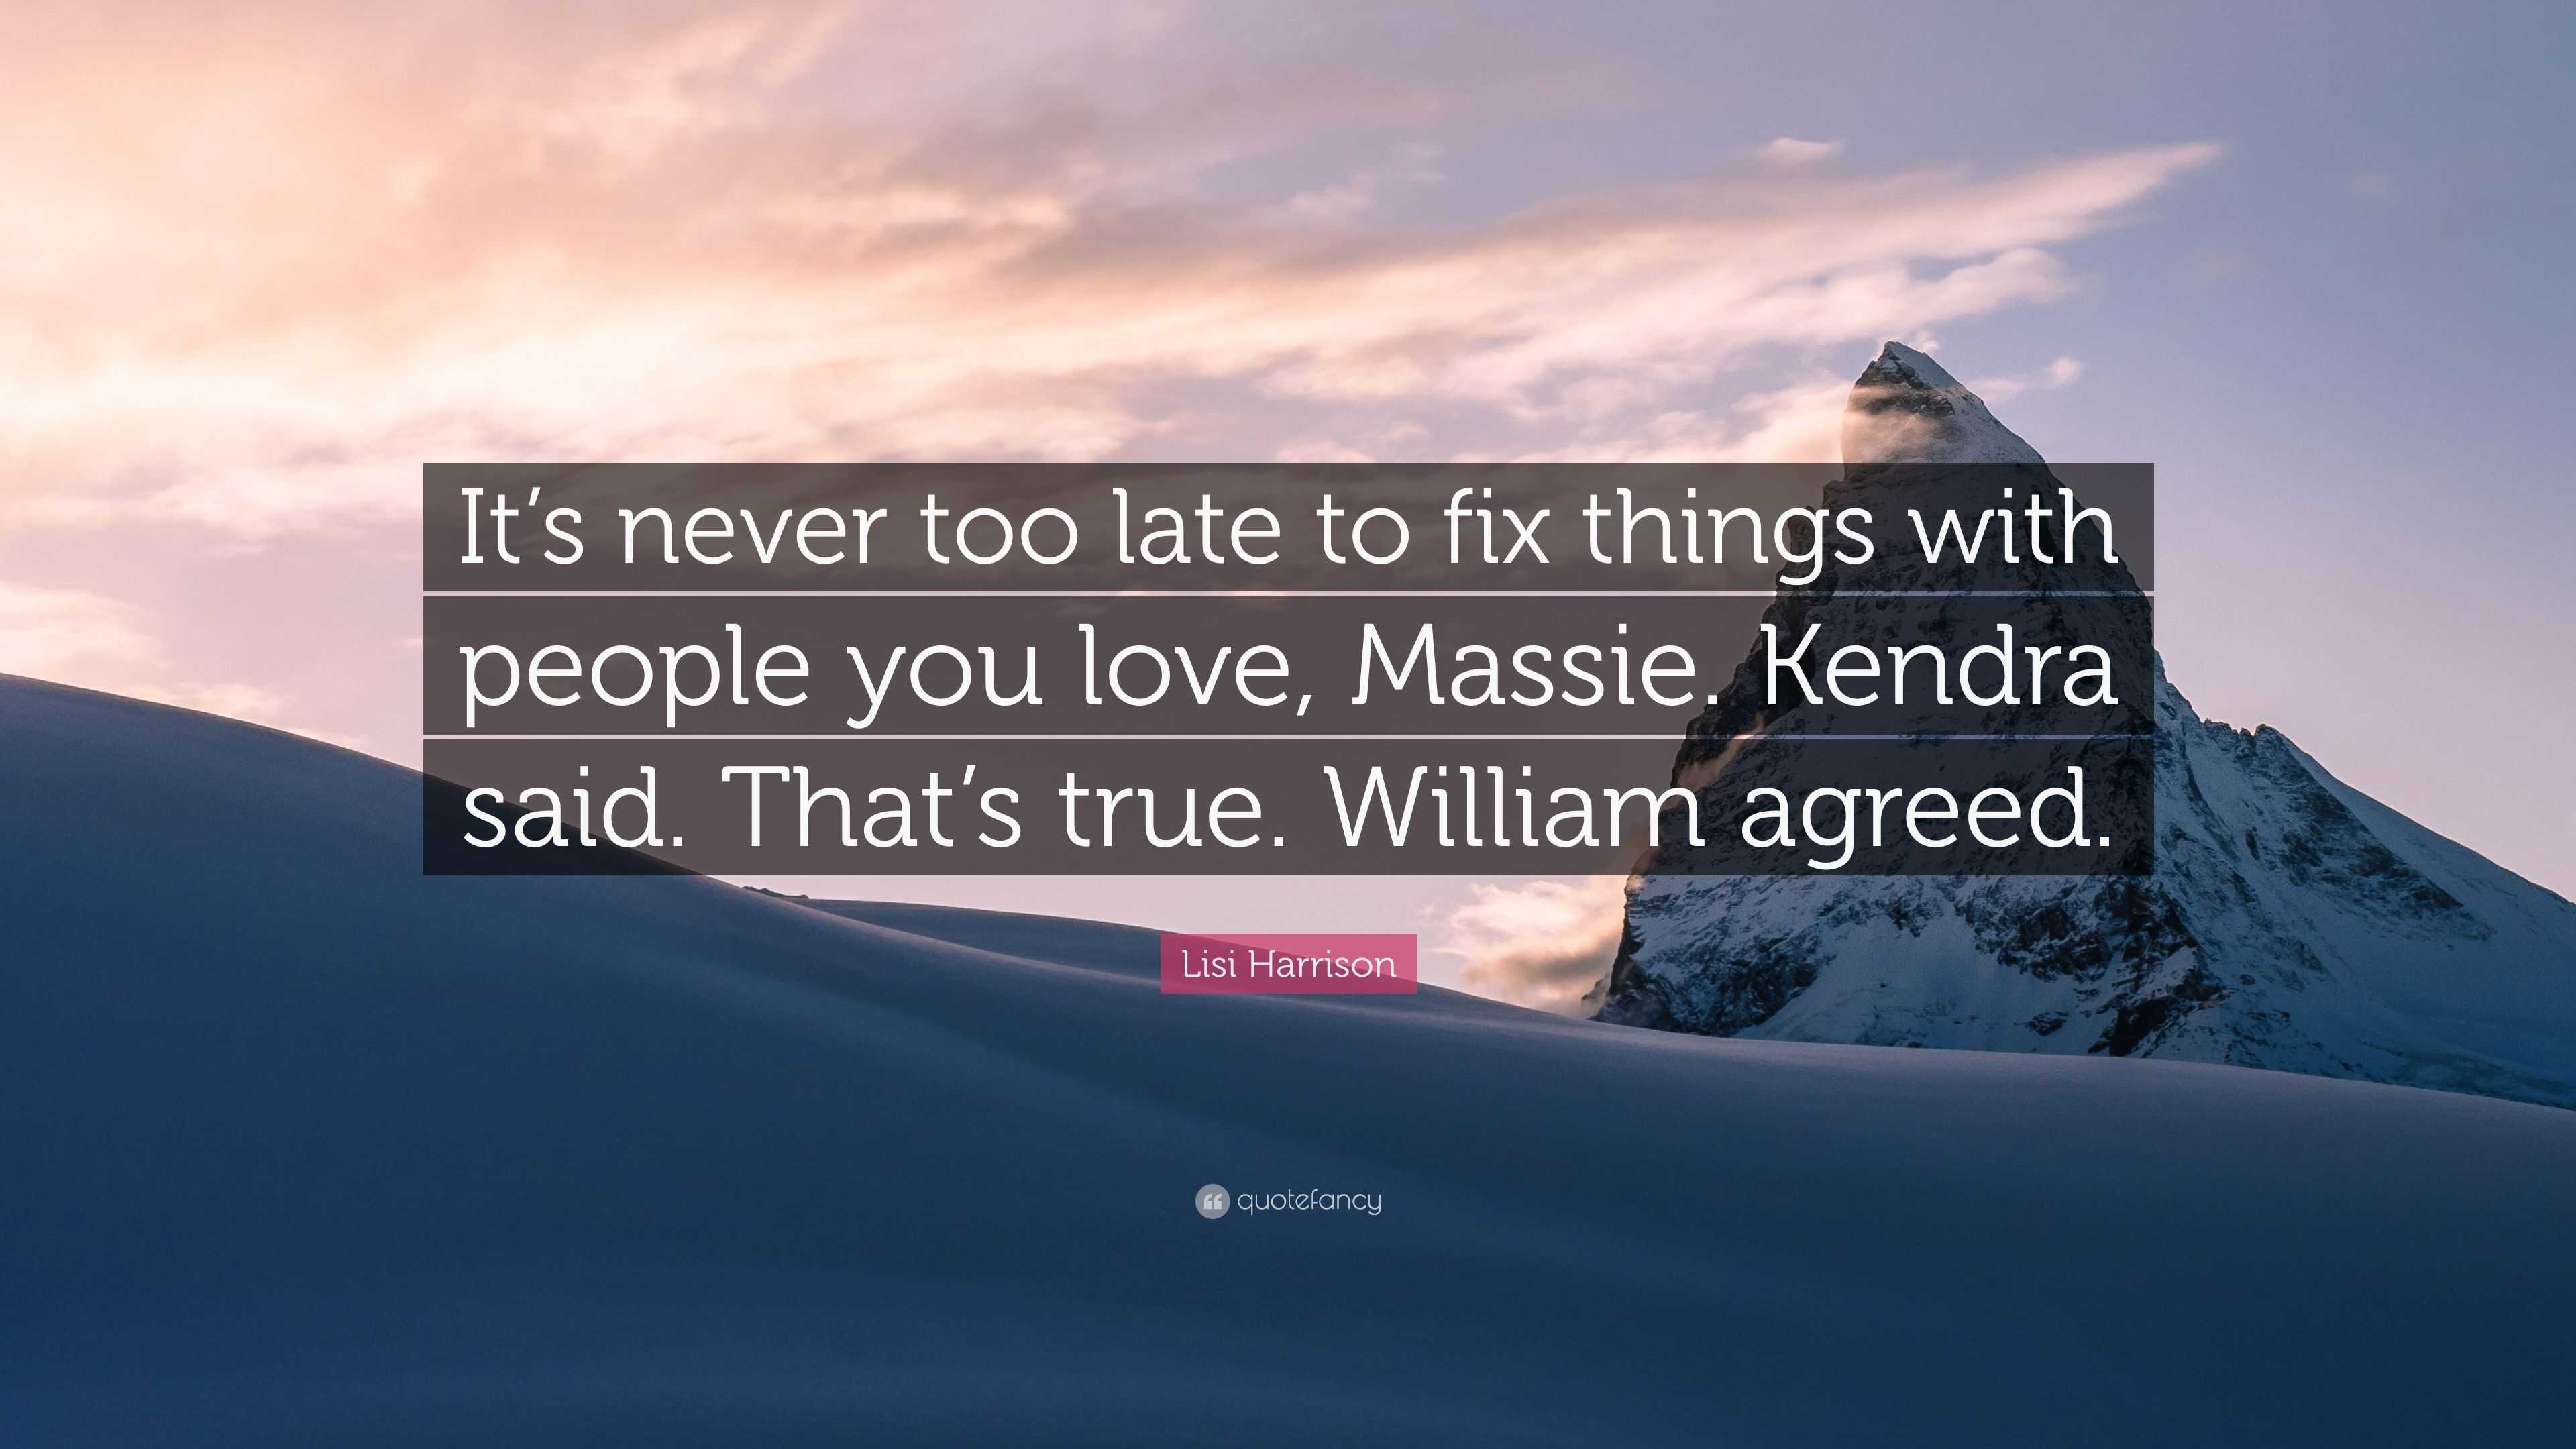 Lisi Harrison Quote “It s never too late to fix things with people you love